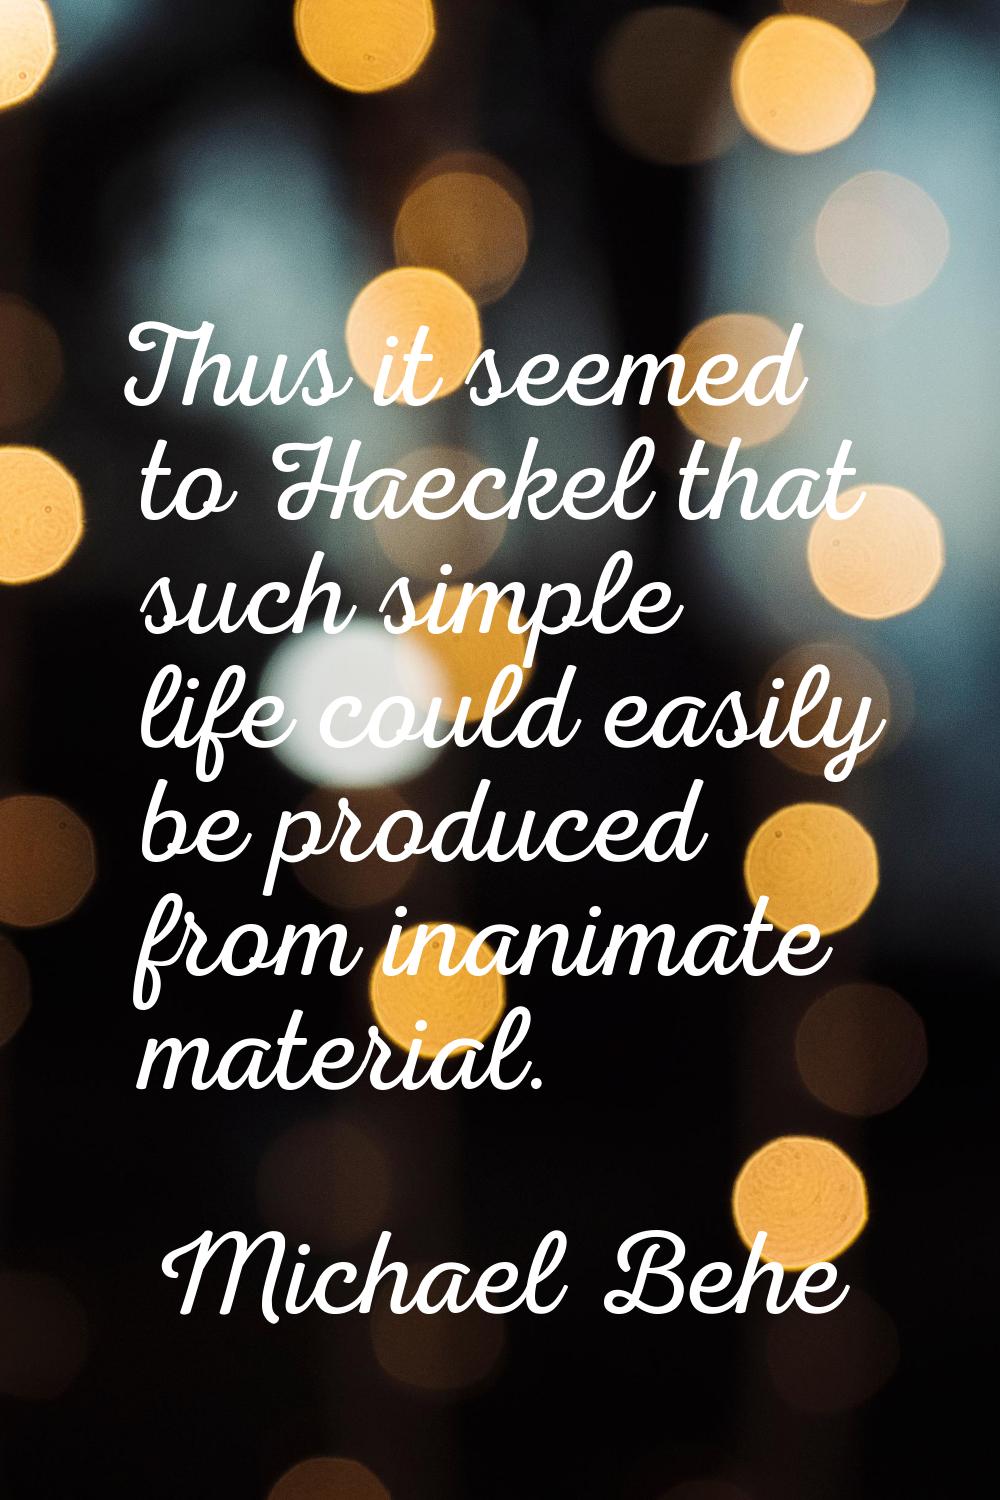 Thus it seemed to Haeckel that such simple life could easily be produced from inanimate material.